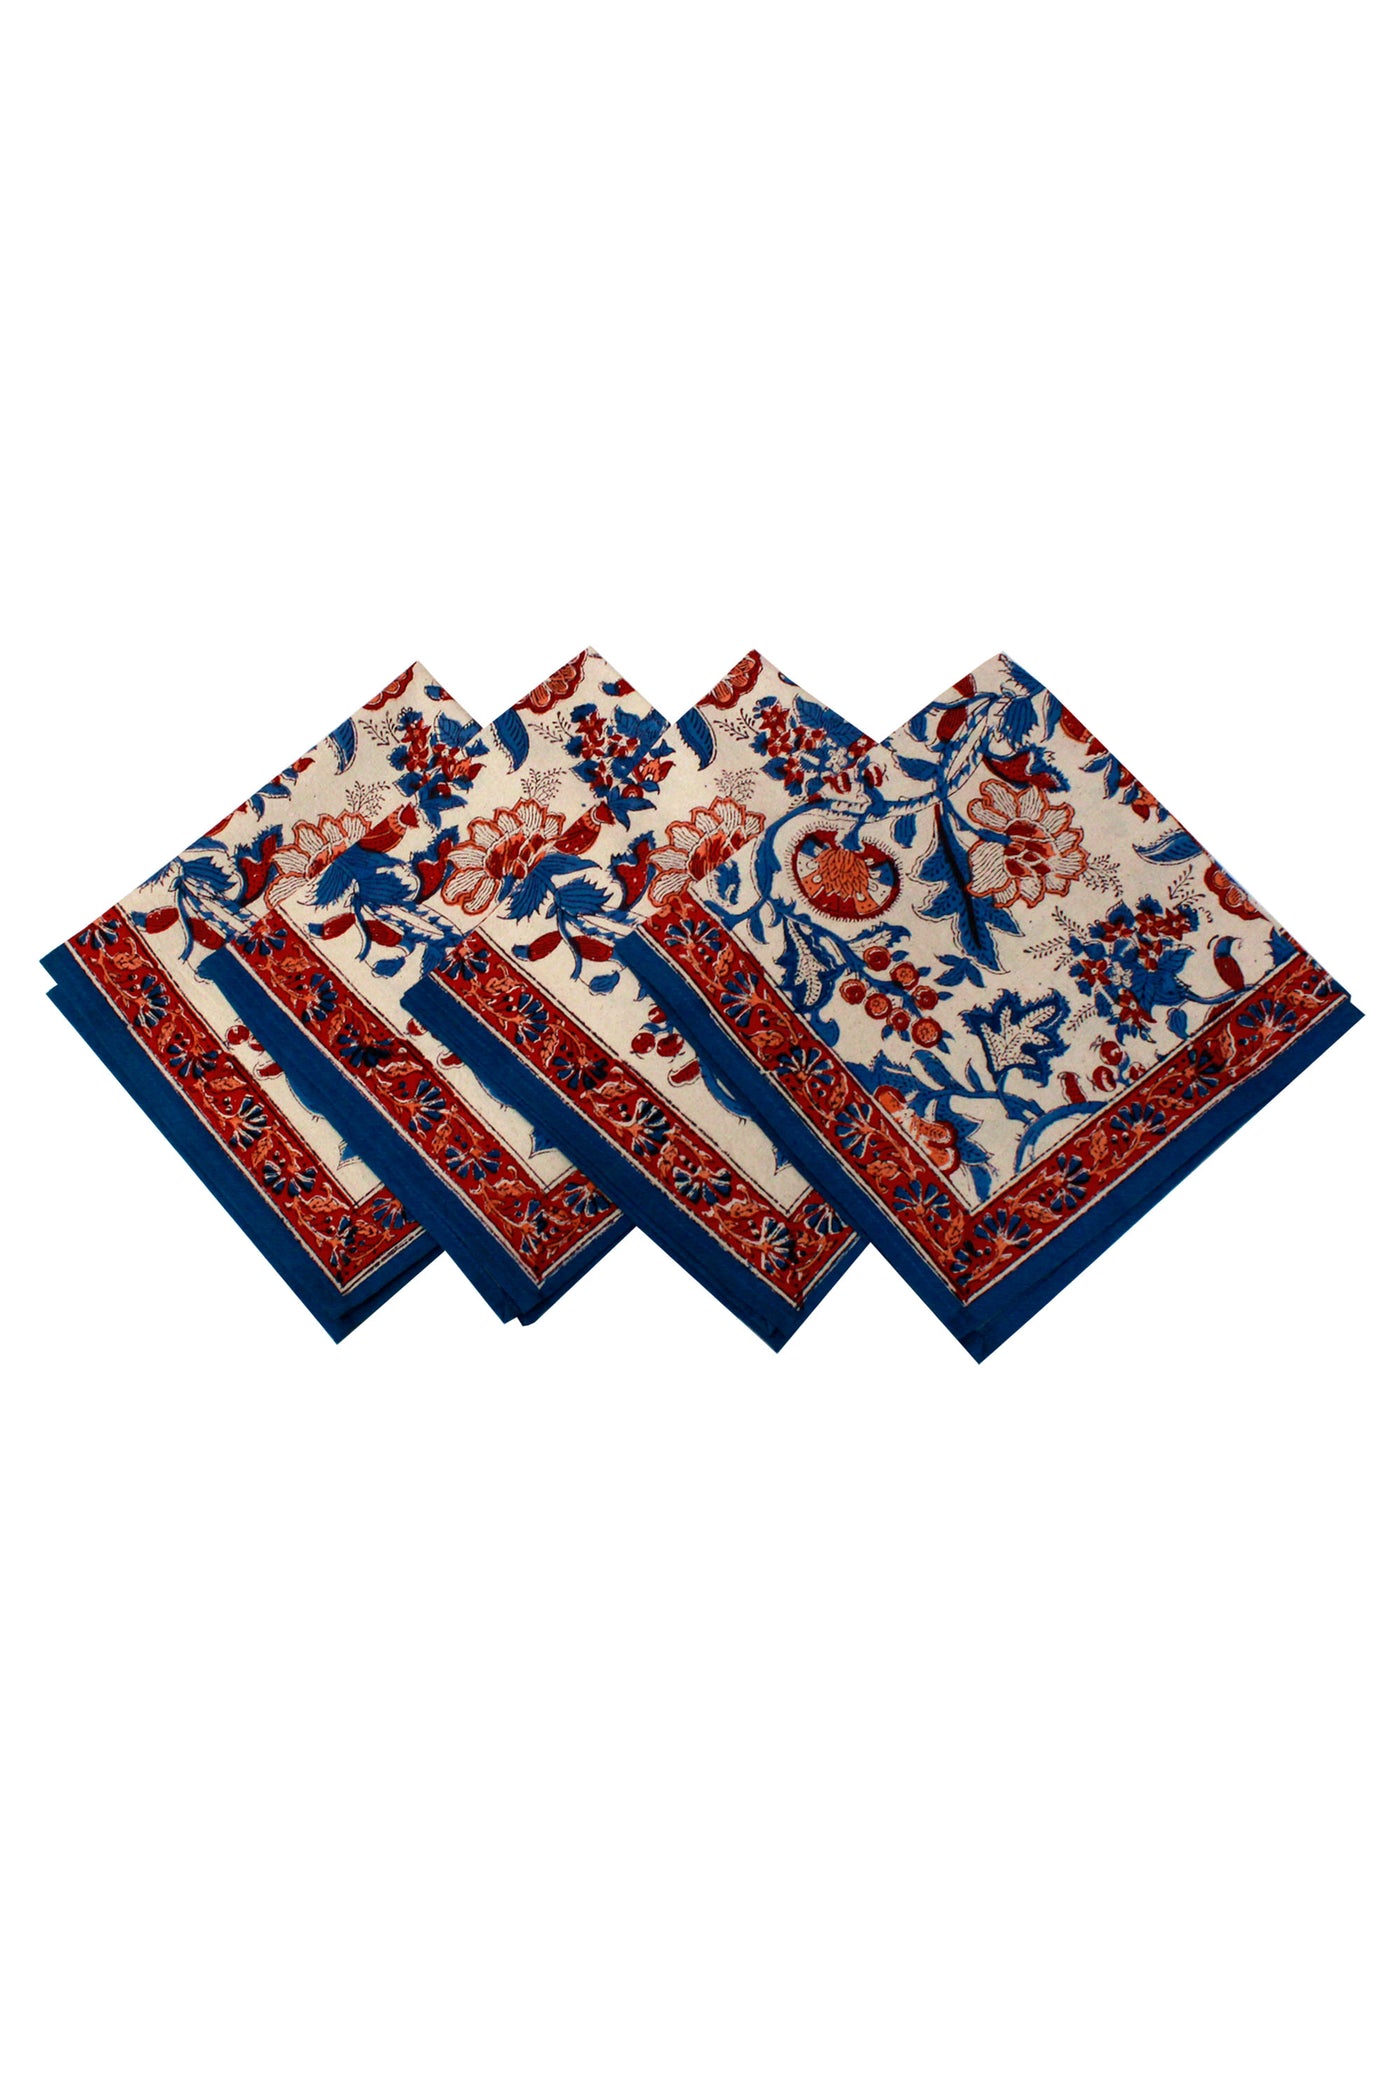 Flower Jaal Hand Block Print Table Napkin in Red and Blue